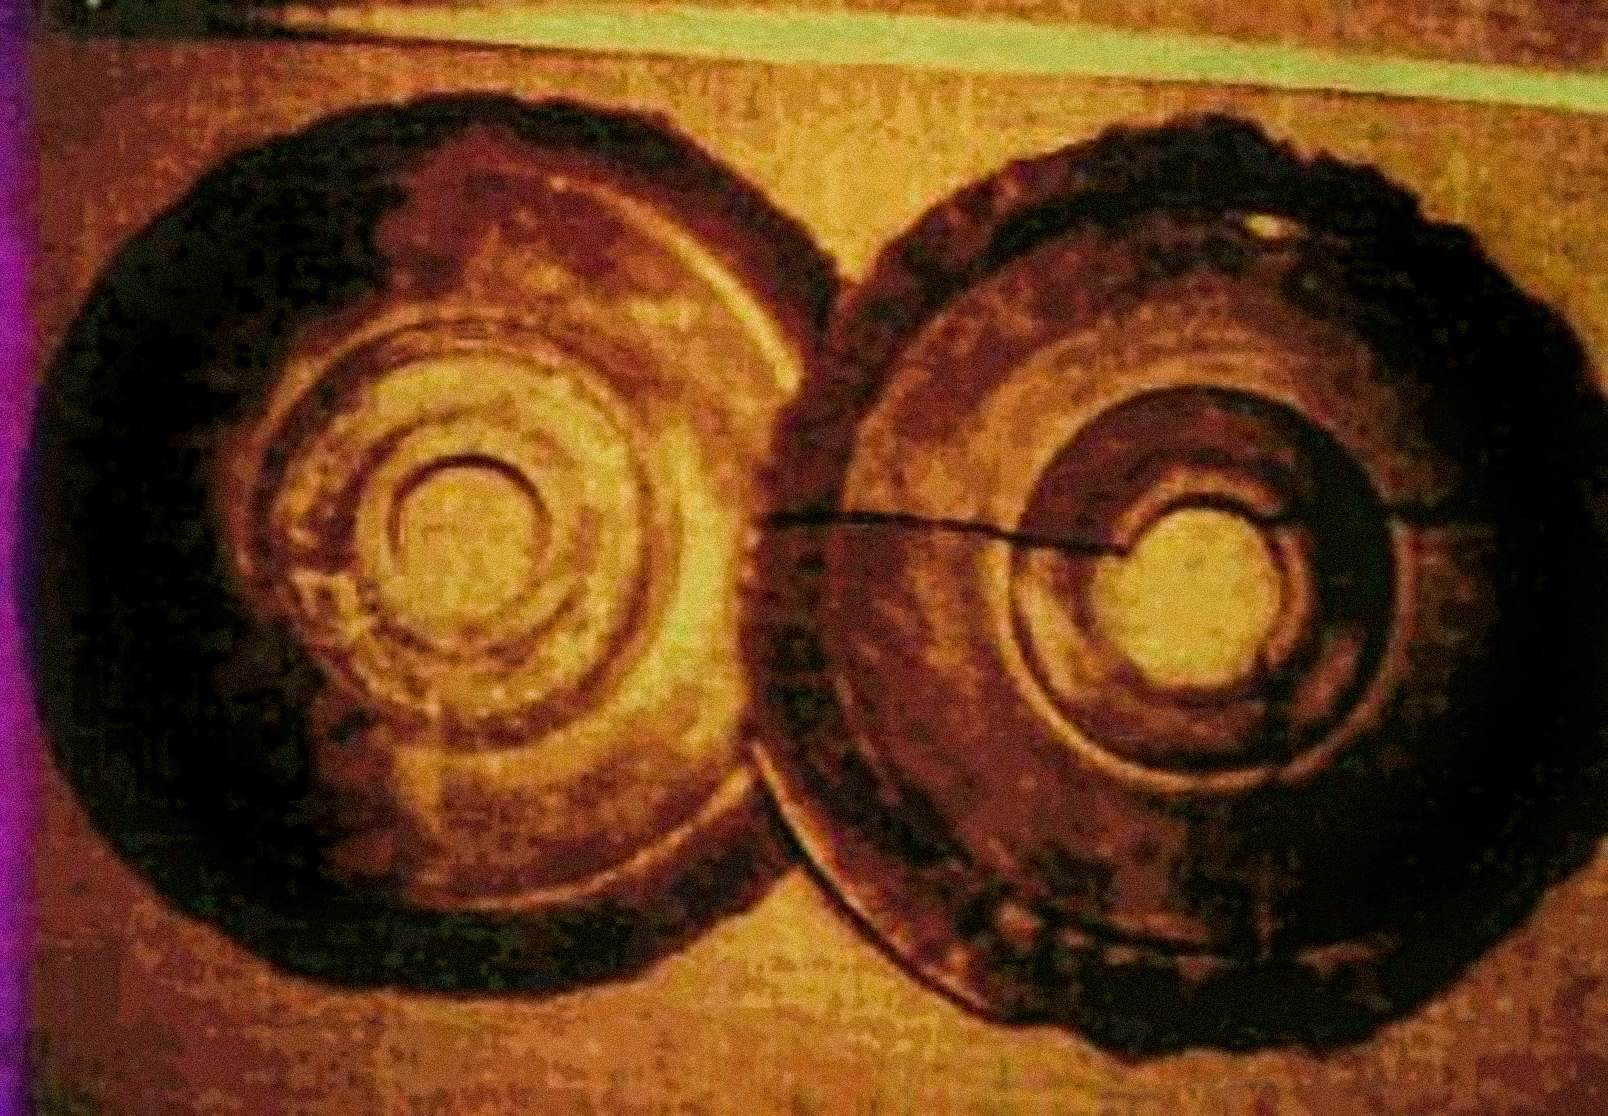 In 1974, Ernst Wegerer, an Austrian engineer, photographed two disks that met the descriptions of the Dropa Stones. He was on a guided tour of Banpo-Museum in Xian, when he saw the stone discs on display. He claims he saw a hole in the centre of each disc and hieroglyphs in partly crumbled spiral-like grooves.